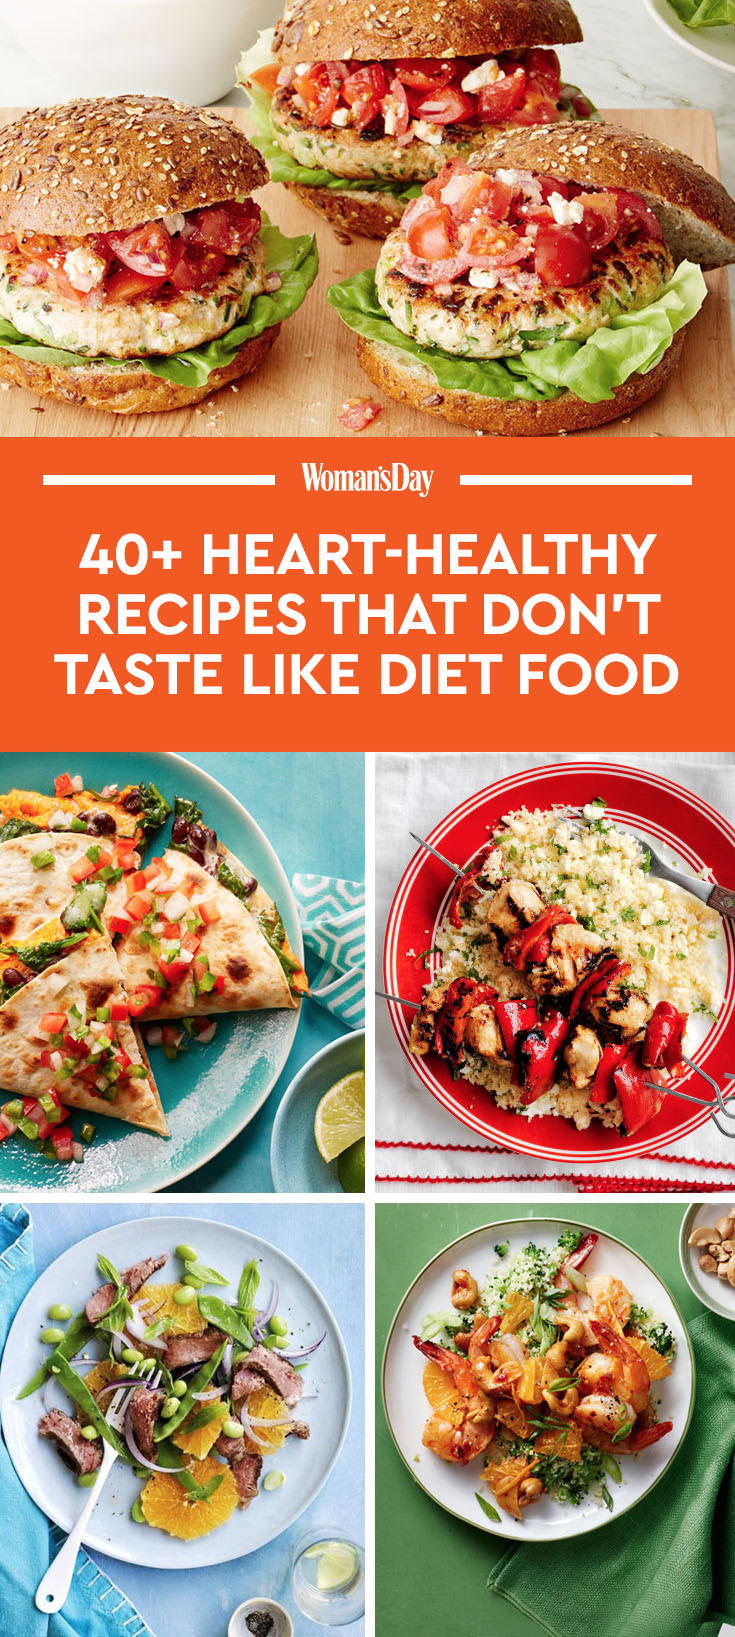 Heart Healthy Diets Recipes
 55 Heart Healthy Dinner Recipes That Don t Taste Like Diet